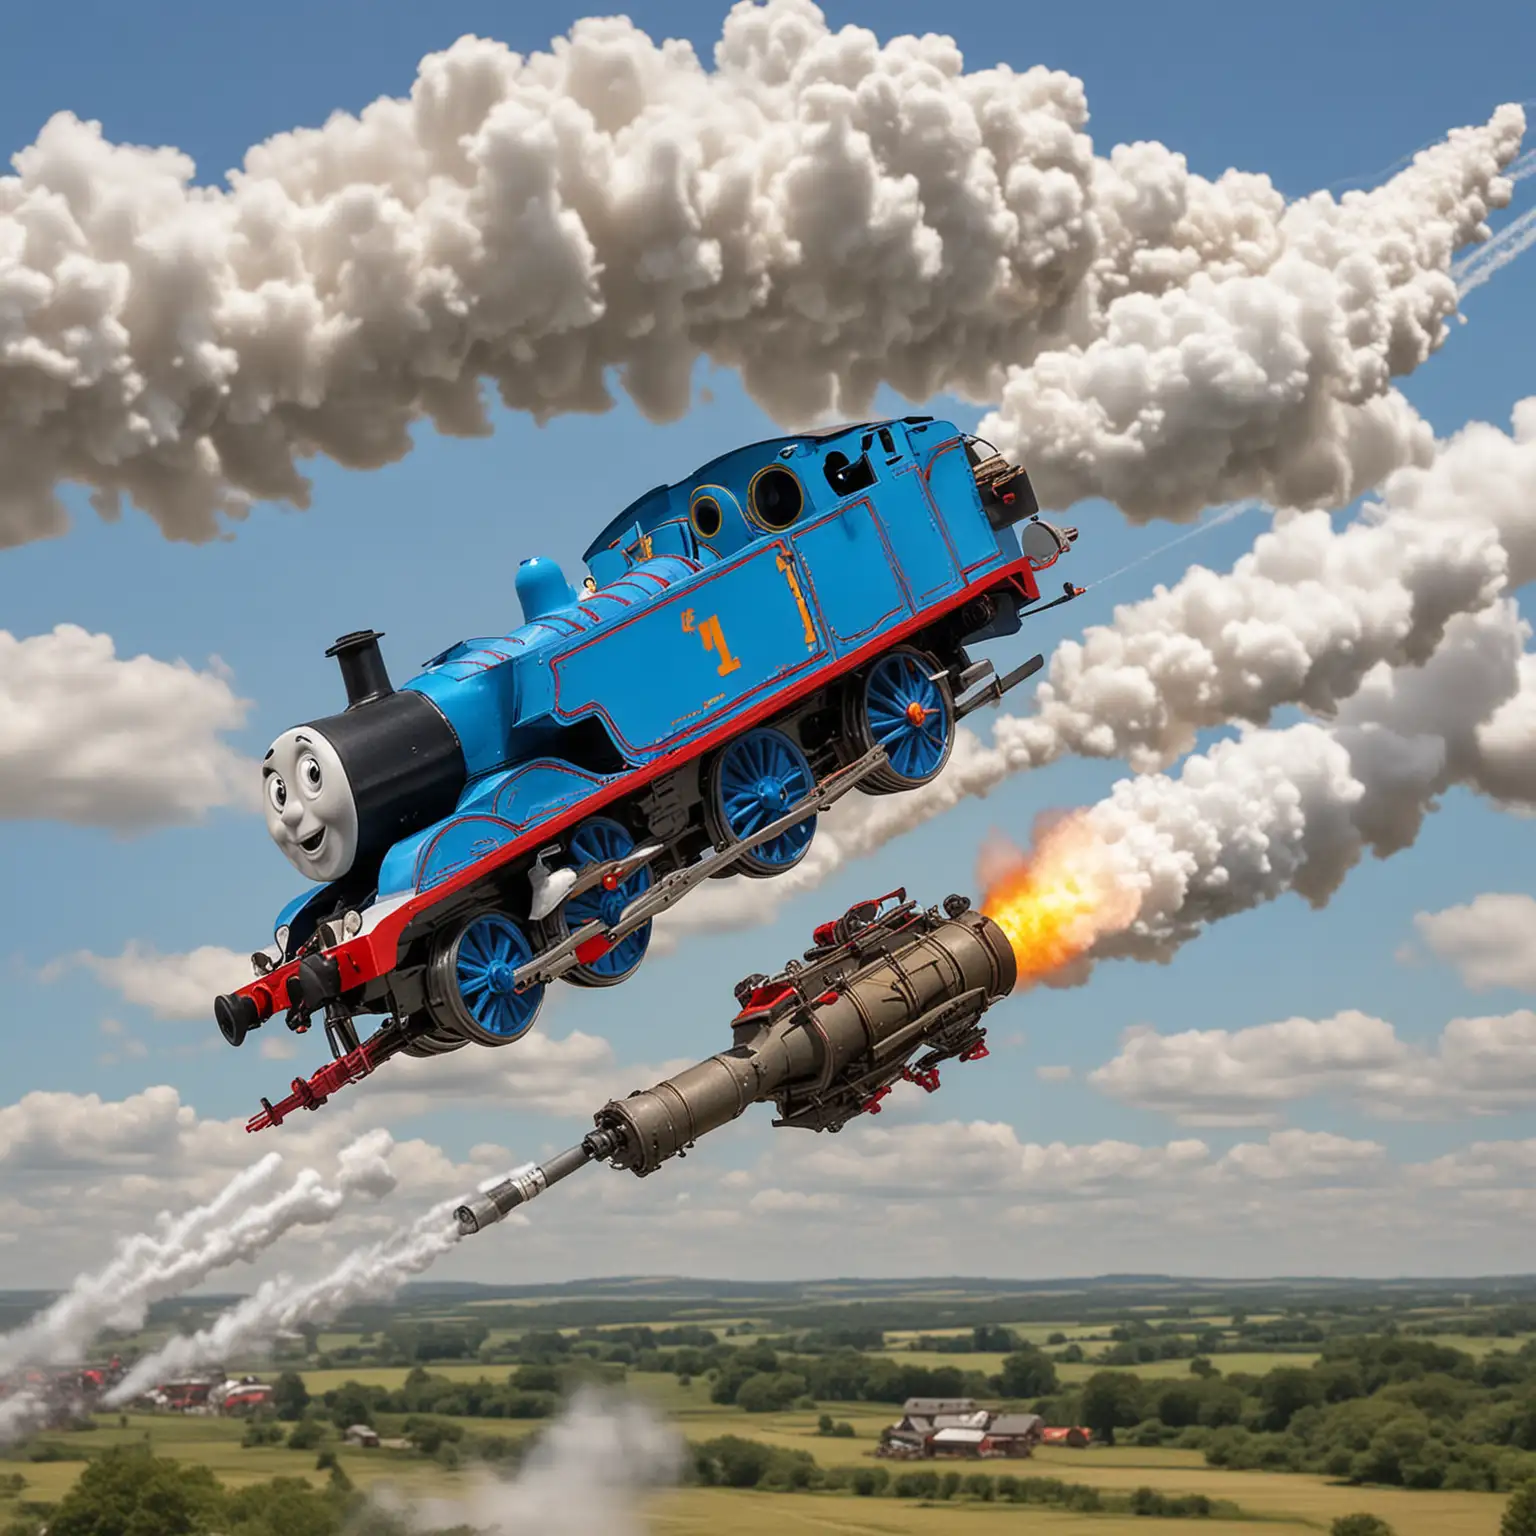 Thomas the Tank Engine Soaring with Rocket Boosters